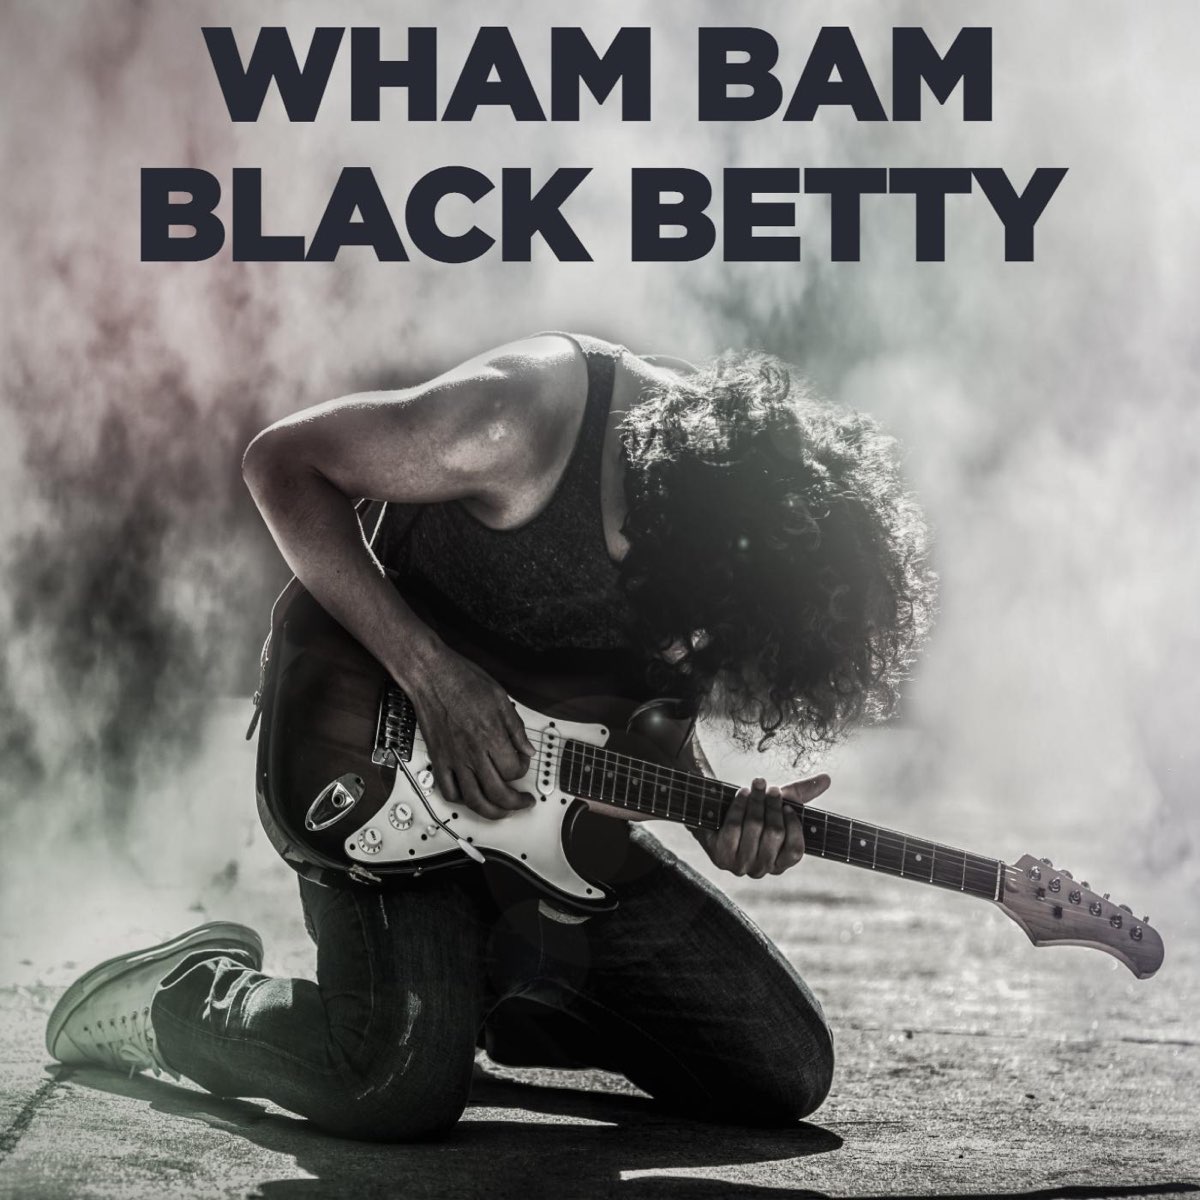 Wham bam. Black Betty. Black Betty Extended Version. Black Betty Spiderbait. Black Betty Extended Version b Sides collection.